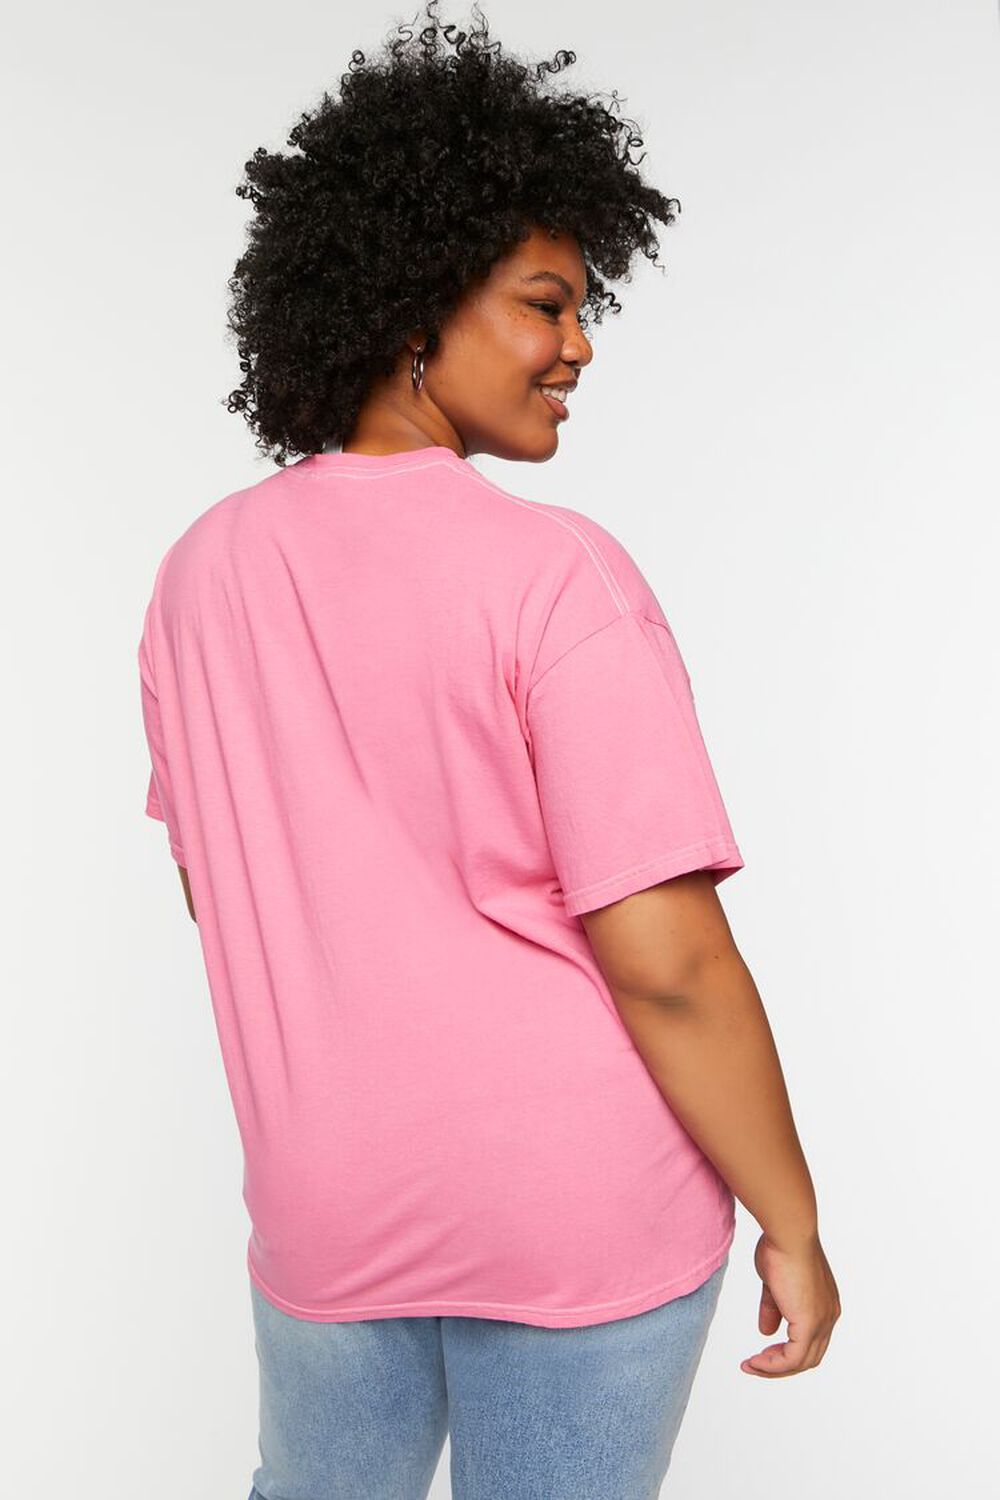 PINK/MULTI Plus Size Racing Legend Graphic Tee, image 3